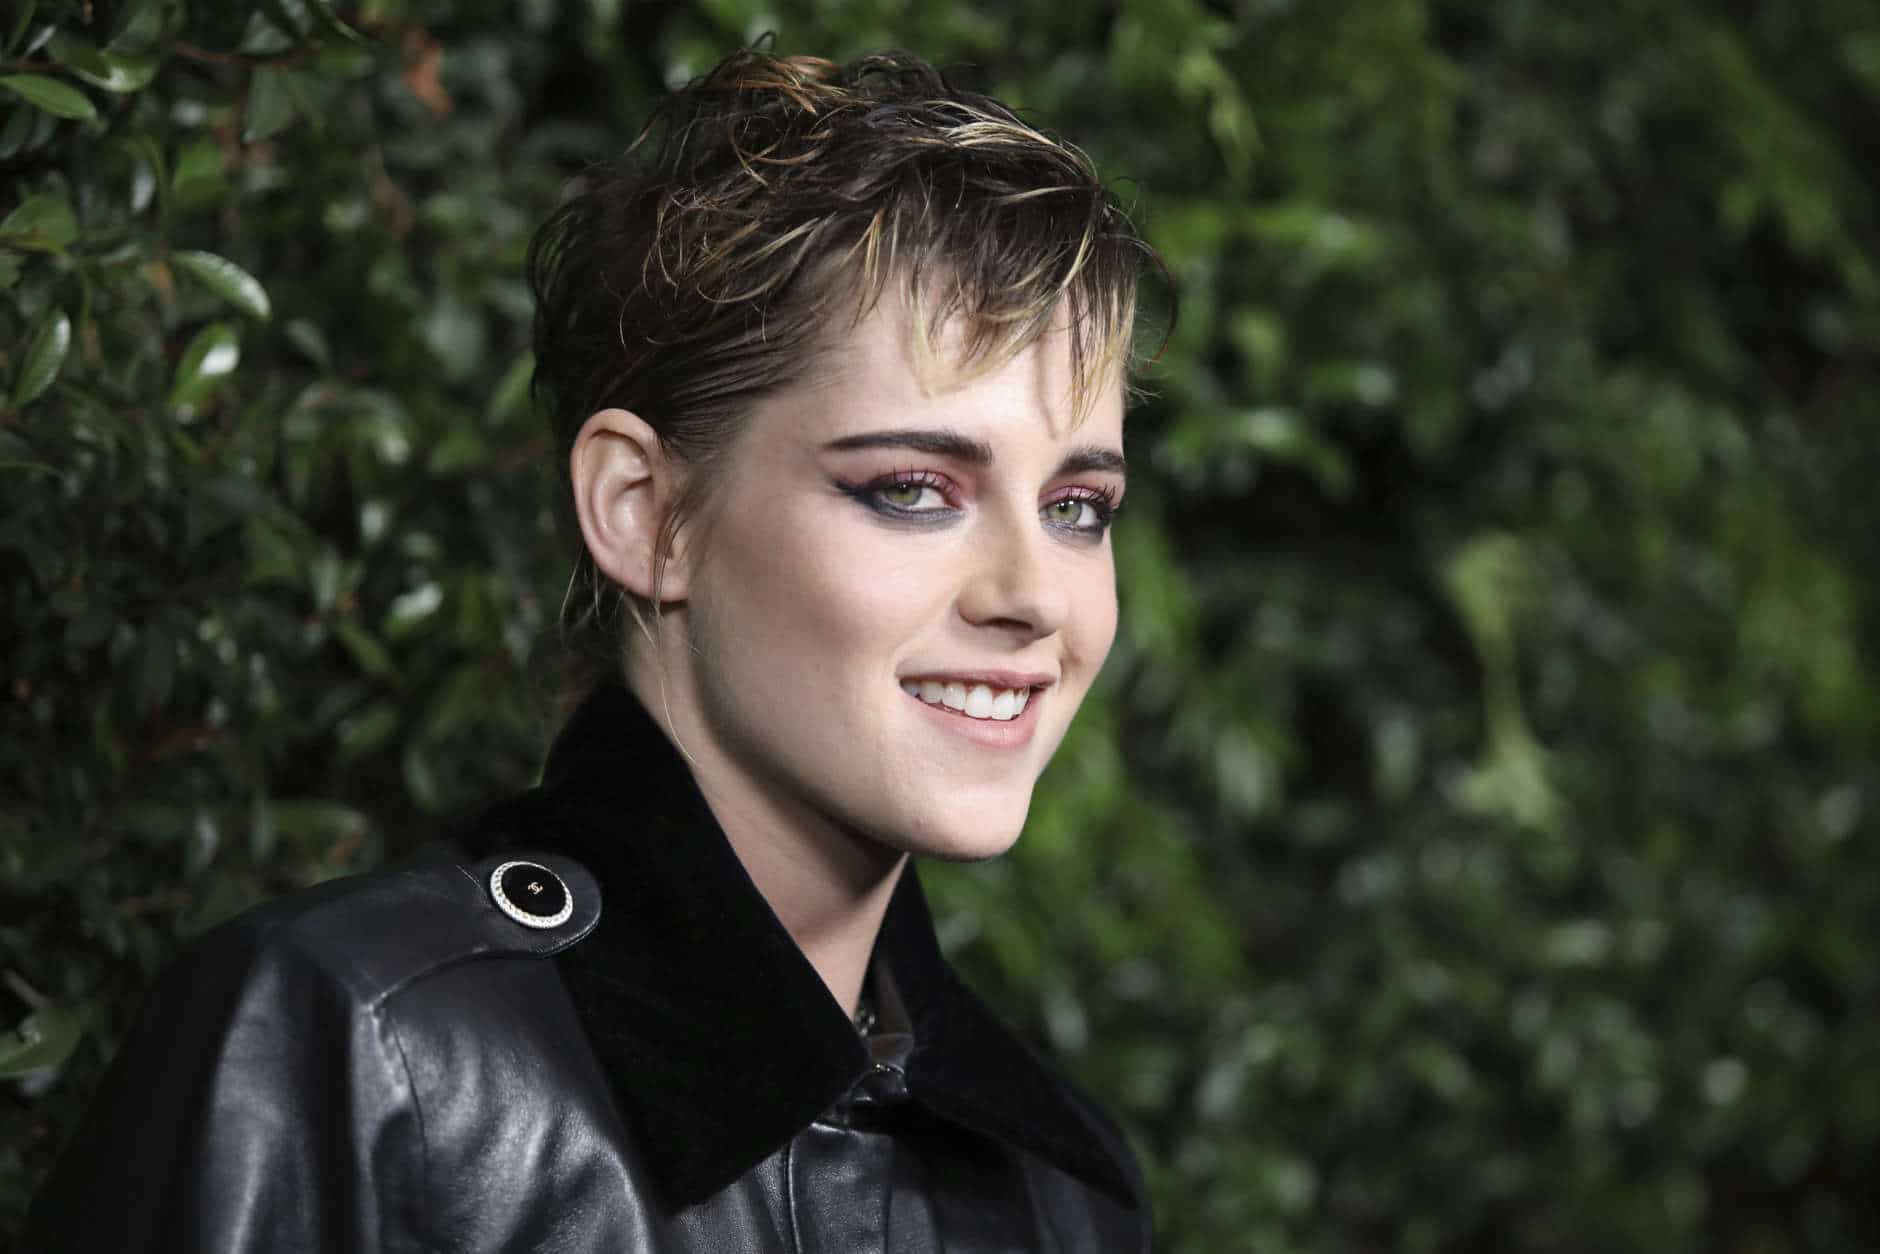 Kristen Stewart arrives at the CHANEL Pre-Oscar Dinner at Madeo Restaurant on Saturday, March 3, 2018, in Los Angeles. (Photo by Omar Vega/Invision/AP)